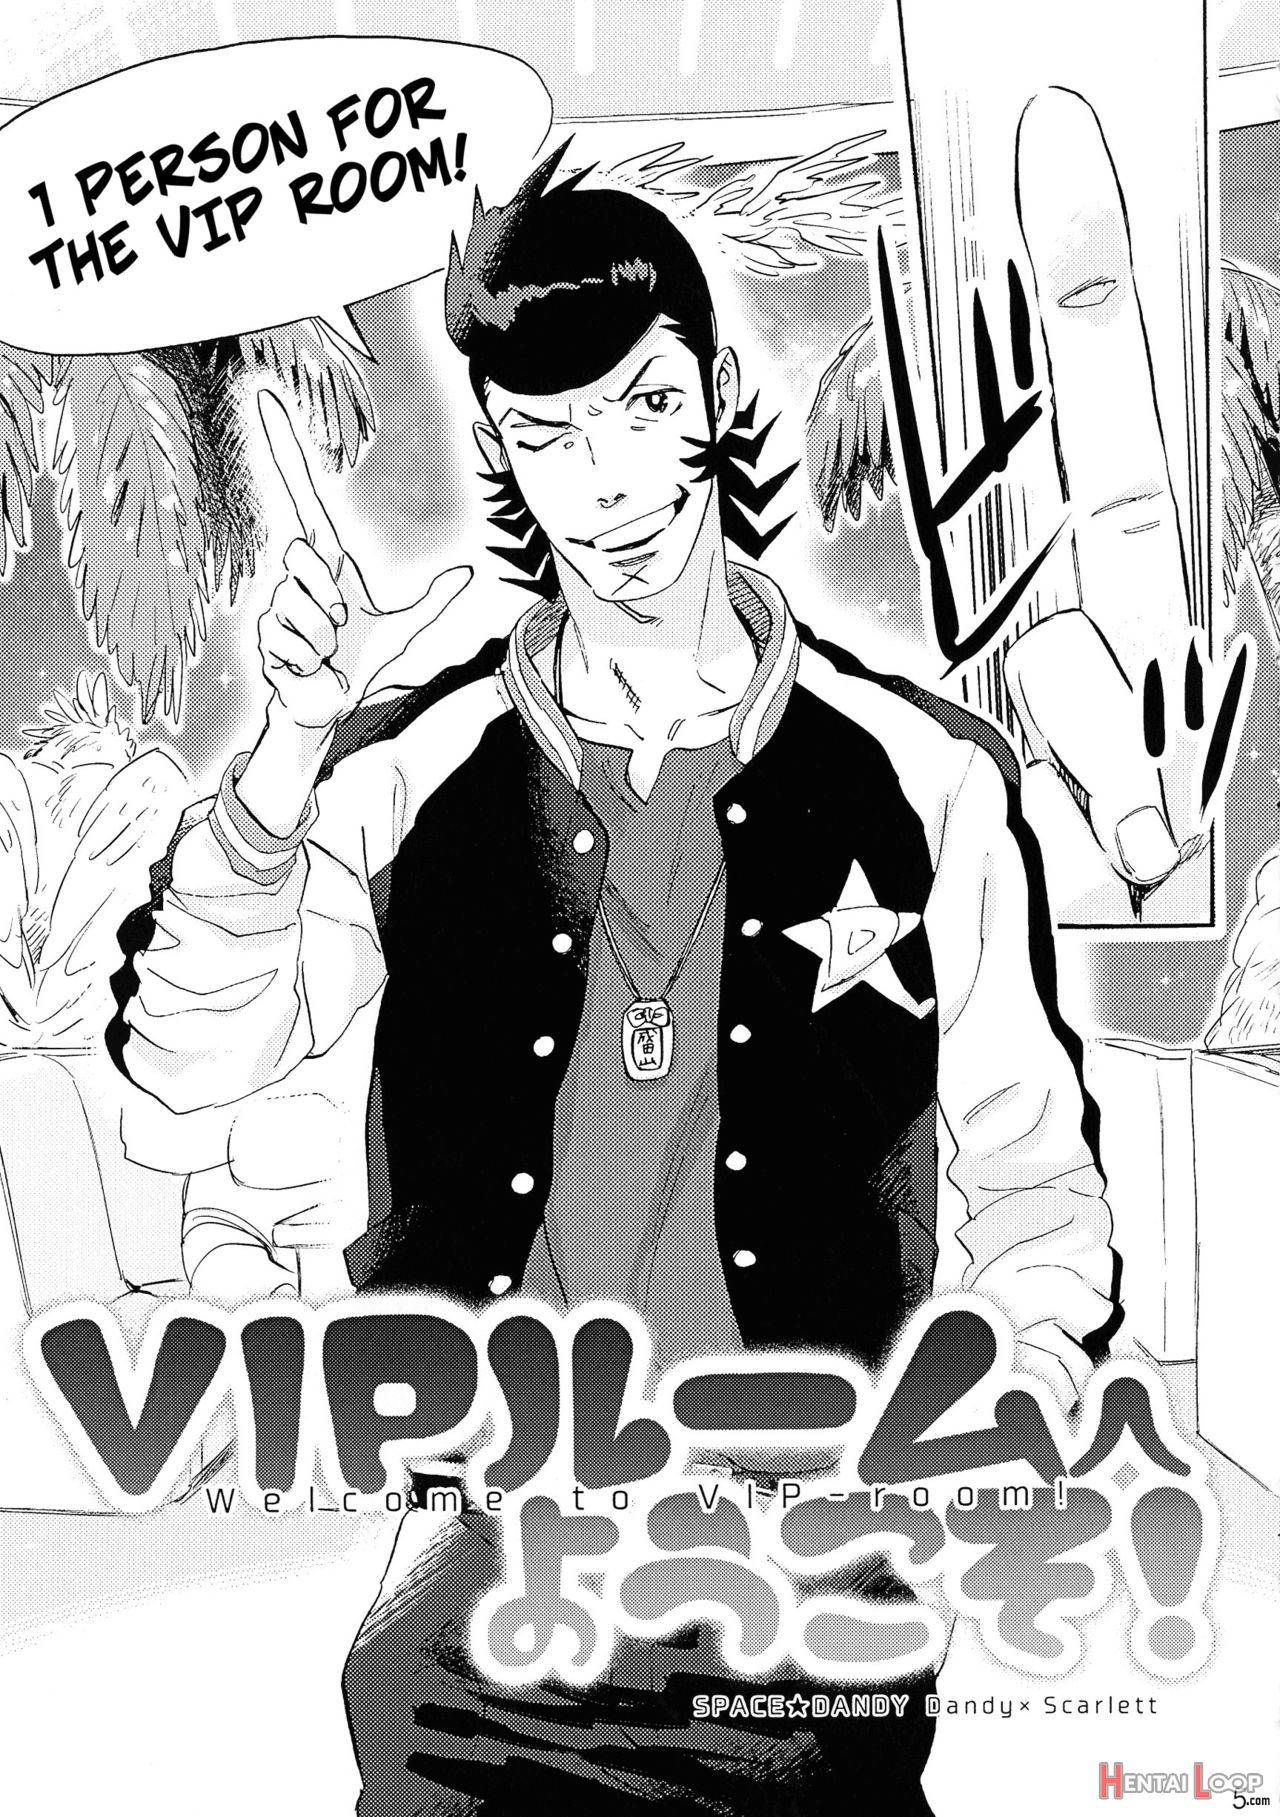 Vip Room E Youkoso! -- Welcome To The Vip-room! page 4